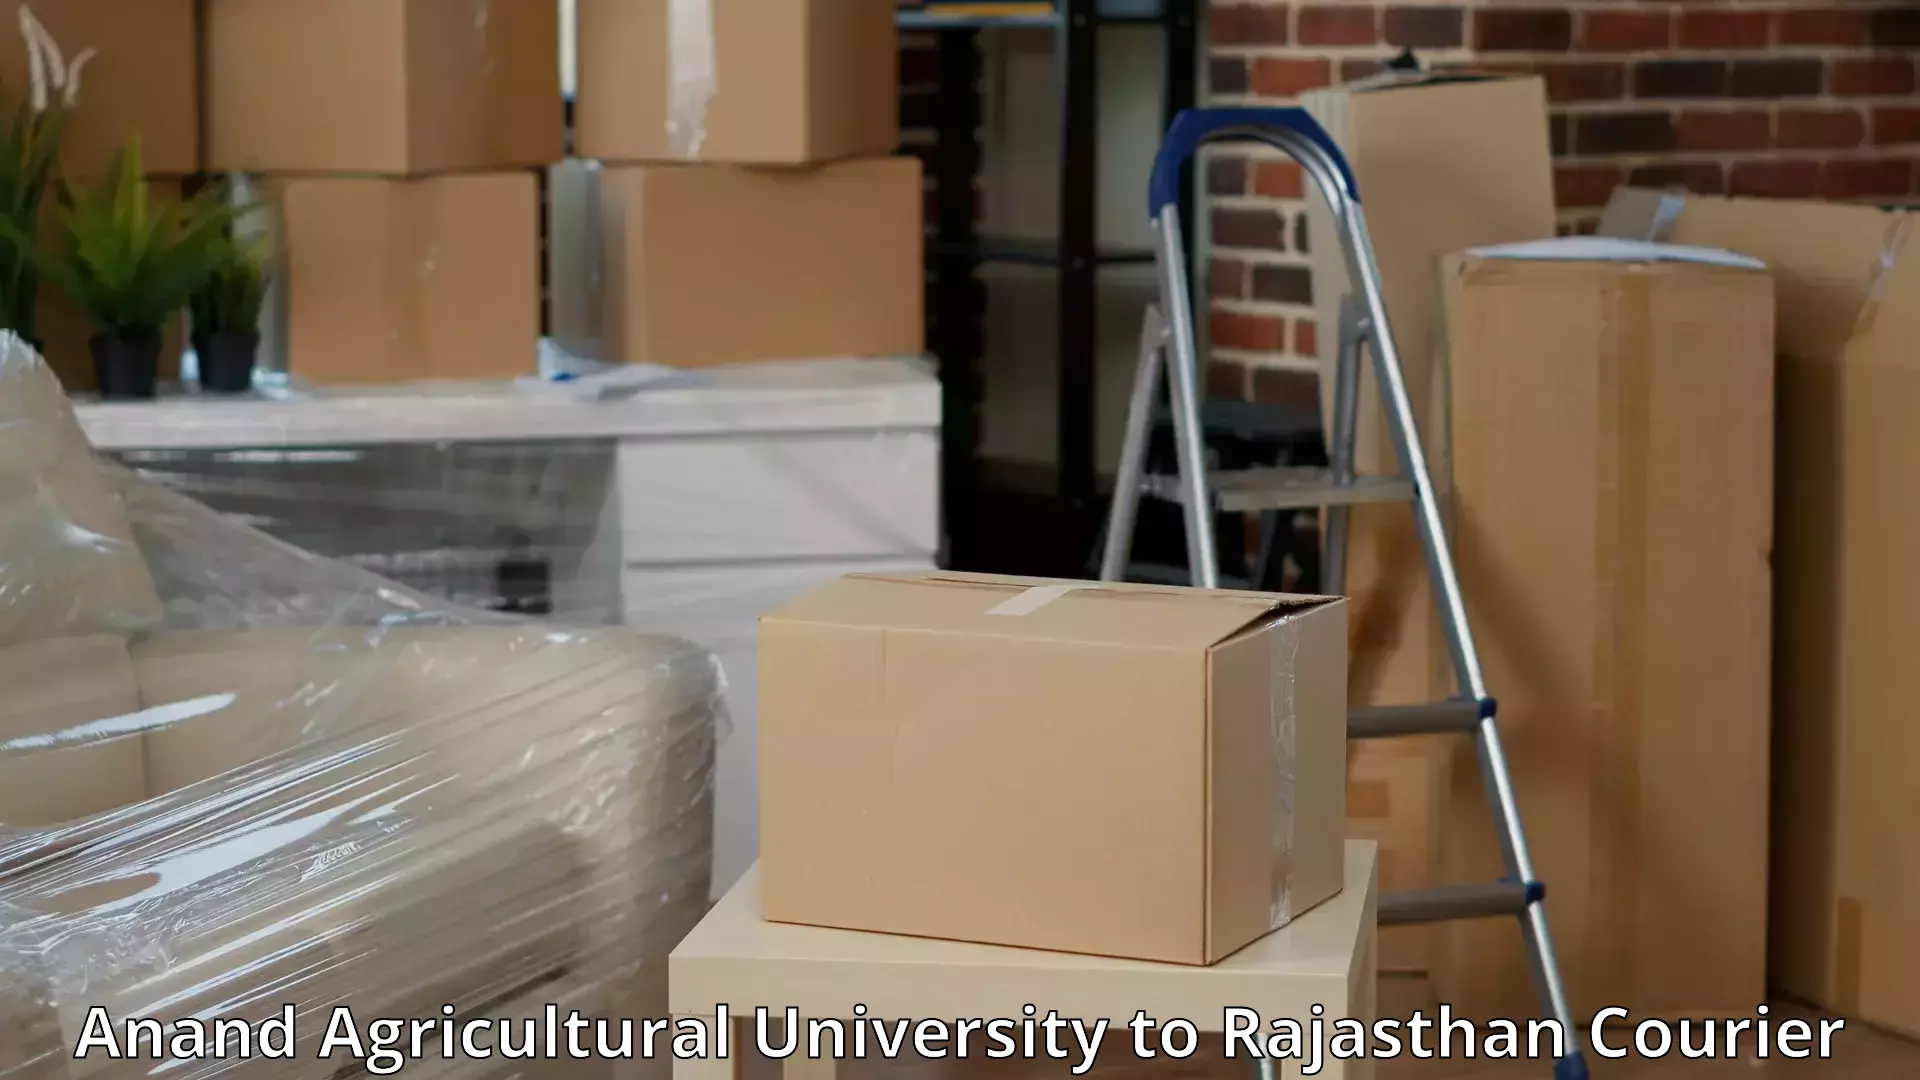 Efficient household relocation Anand Agricultural University to Banasthali Vidyapith